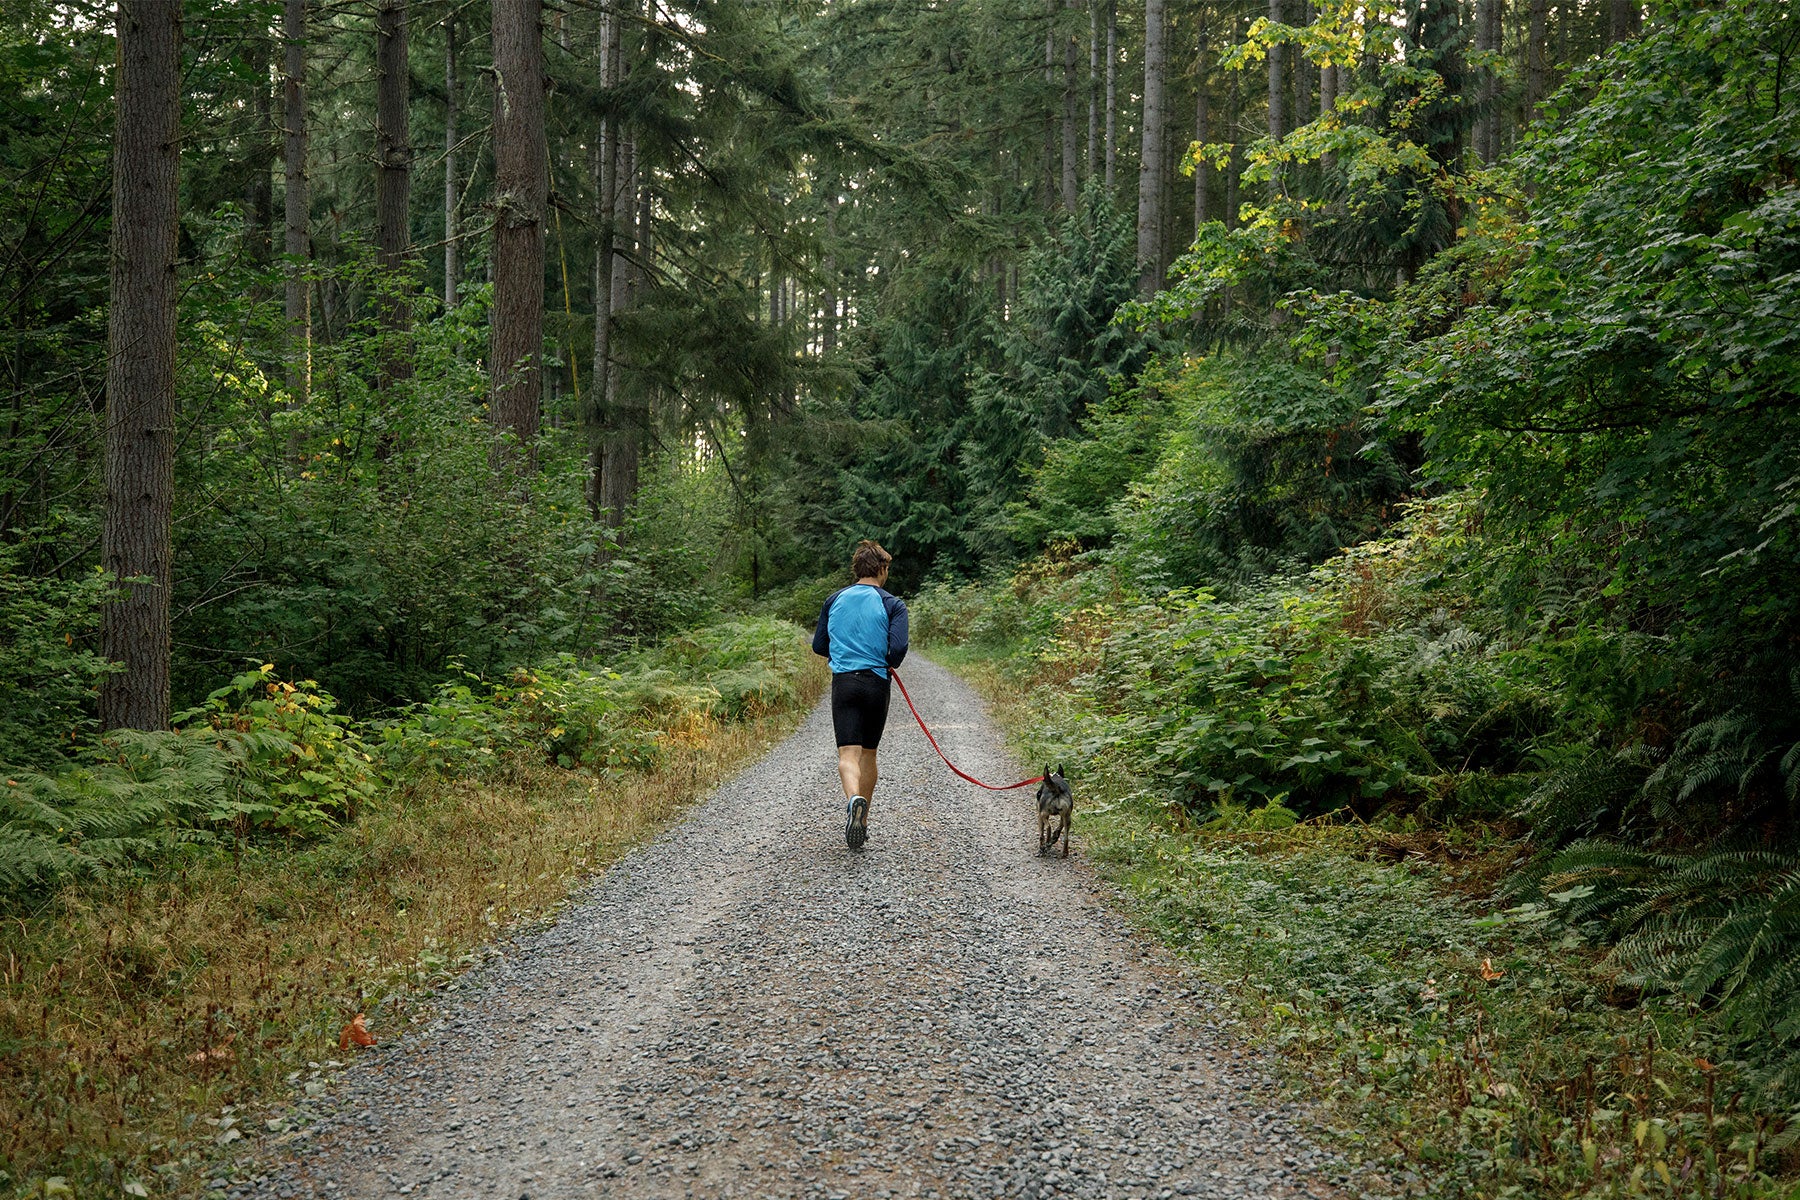 Human and dog go for a run.